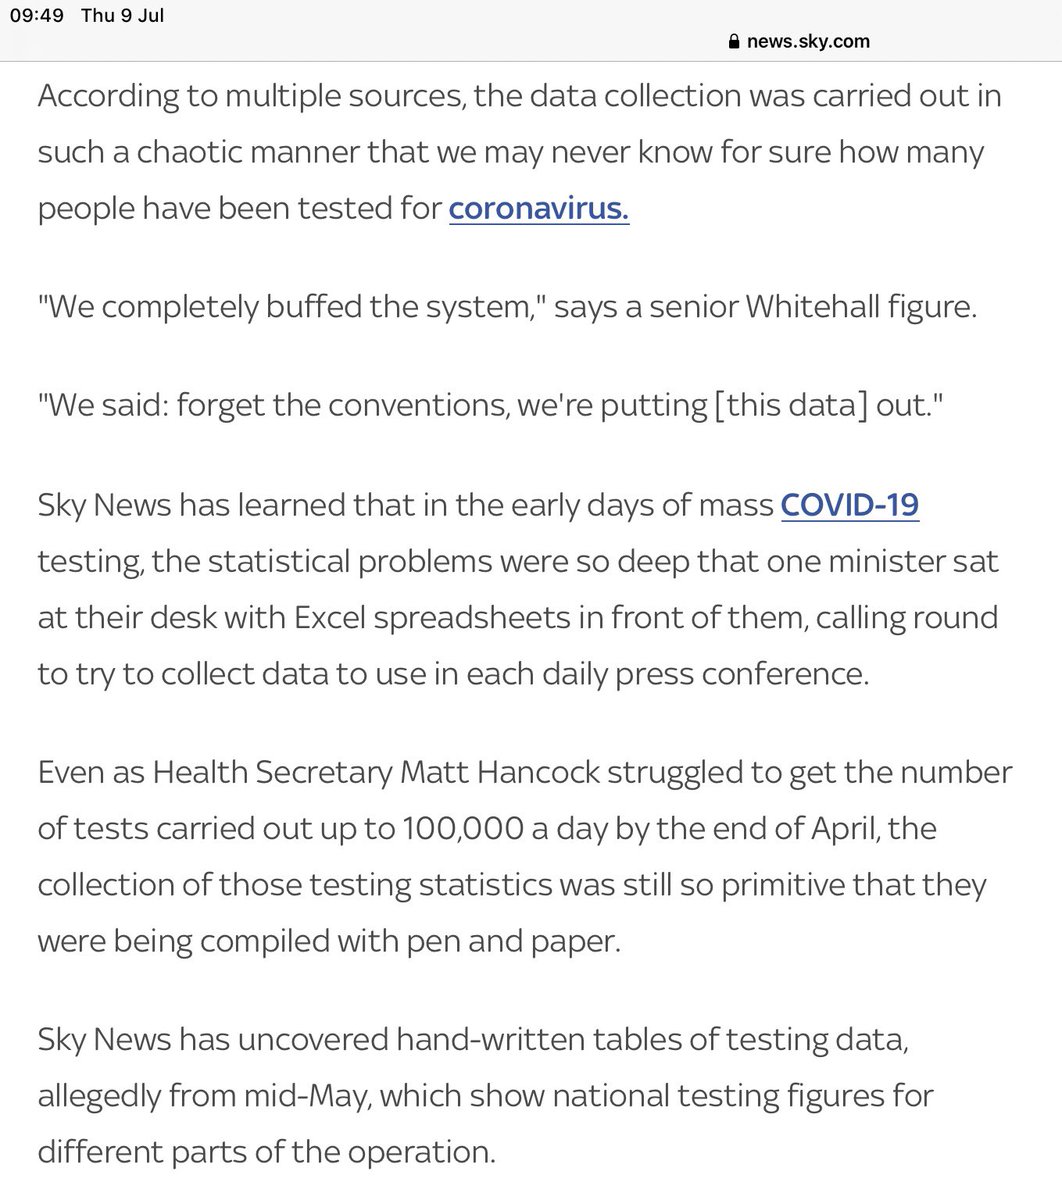 4/. I did forsee it. And so did experienced public health specialist. Have established data systems was a potential strength thrown away in its pursuit of privatising the NHS.Duplication.Patients and tests lost.Now we see constant, daily, historical adjustments